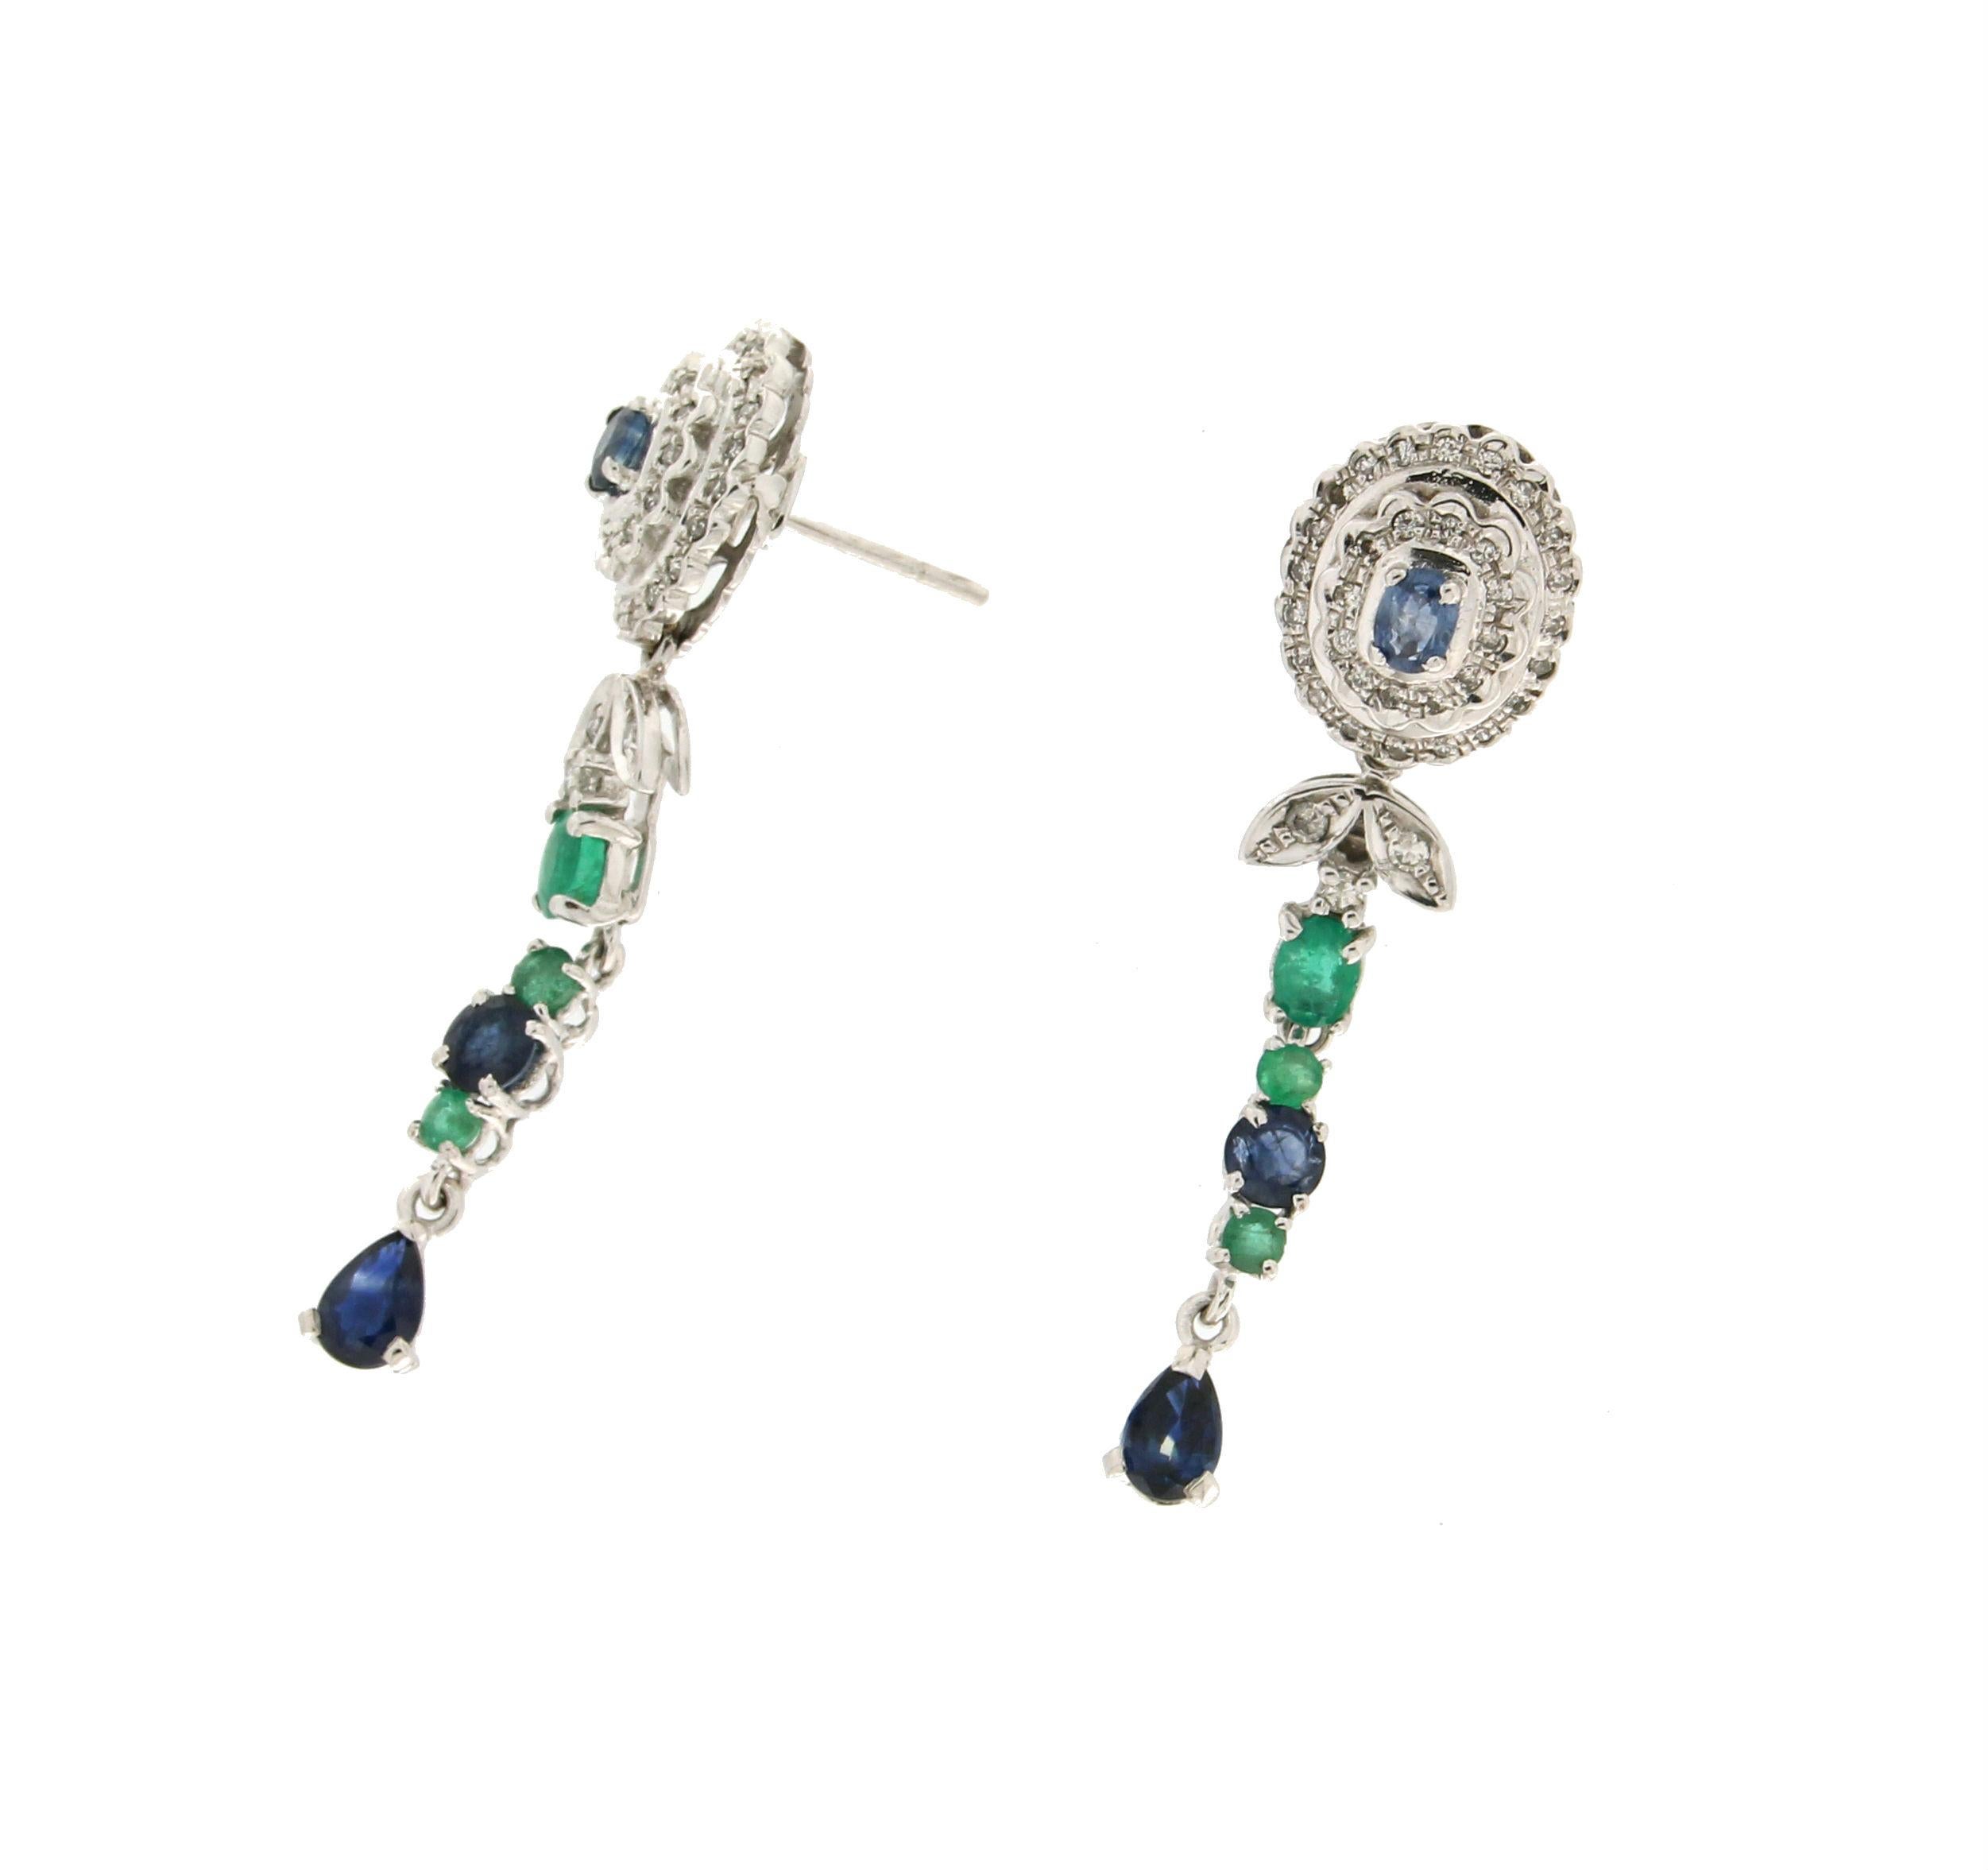 18 karat white gold drop earrings. Handmade by our artisans assembled with diamonds,sapphires and emeralds

Sapphires and emeralds total weight 0.90 karat
Diamonds weight 0.50 karat
Earrings total weight 8.40 grams